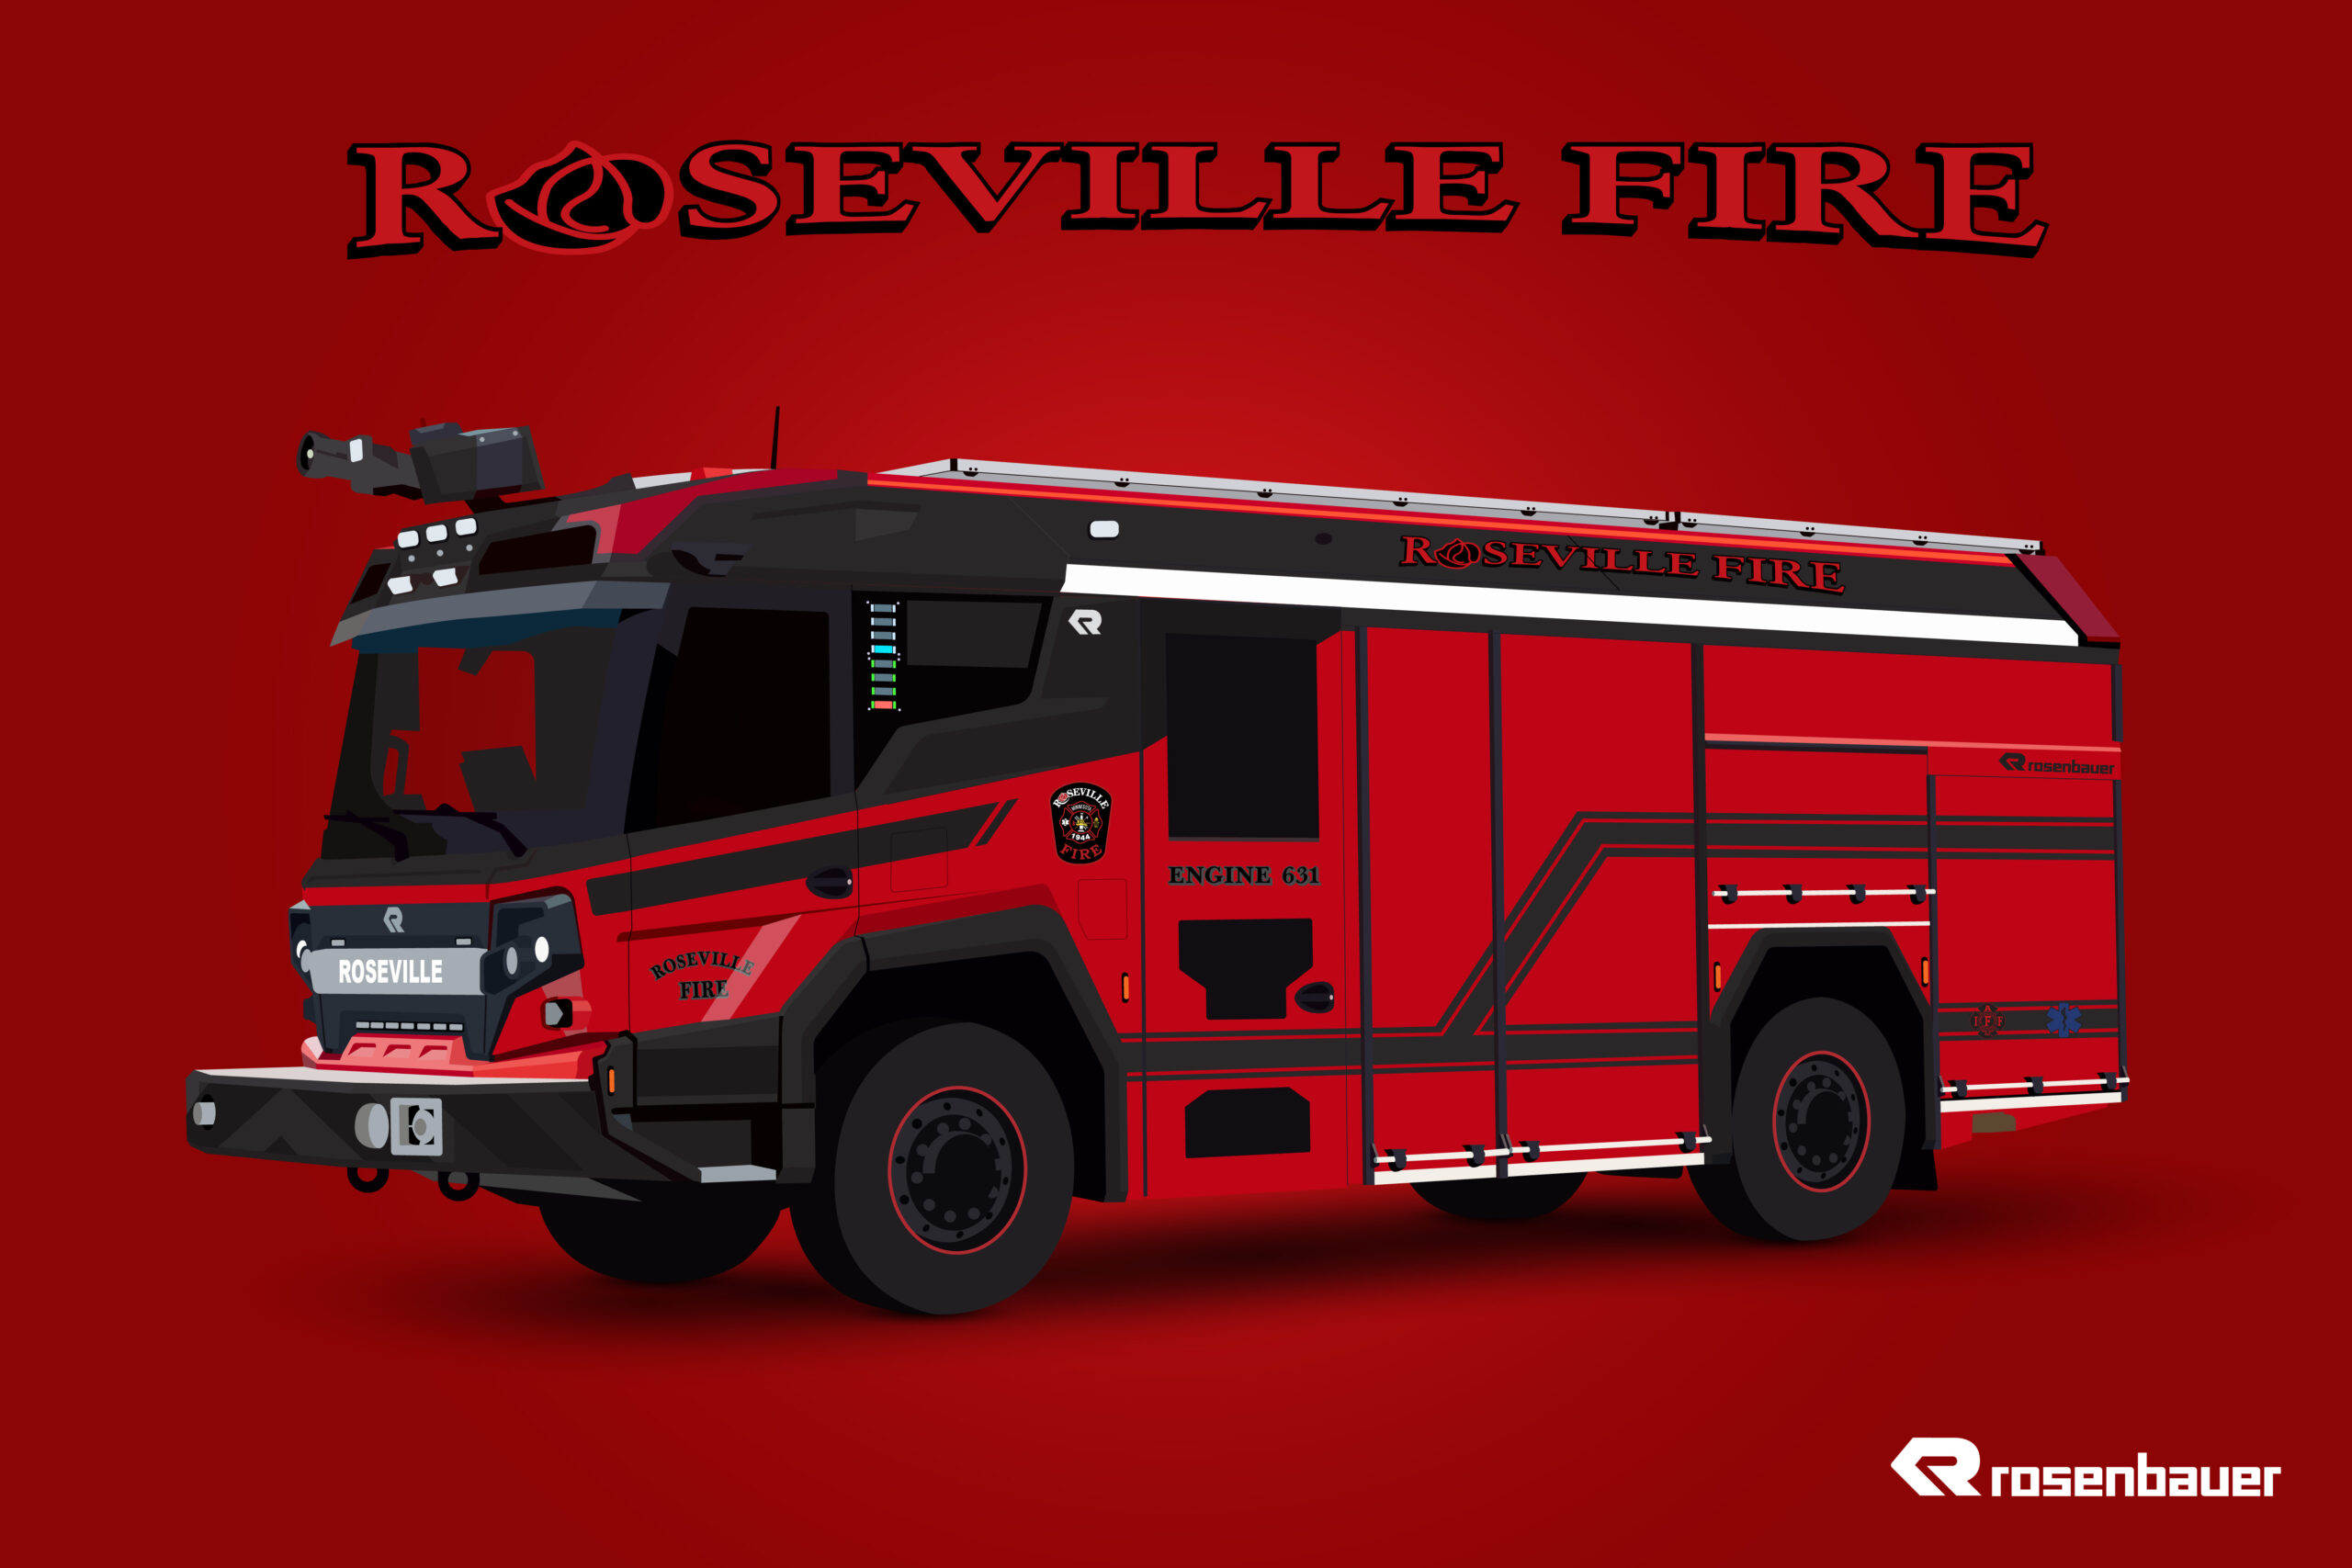 Roseville, MN Embraces Innovation with Electric Fire Engine